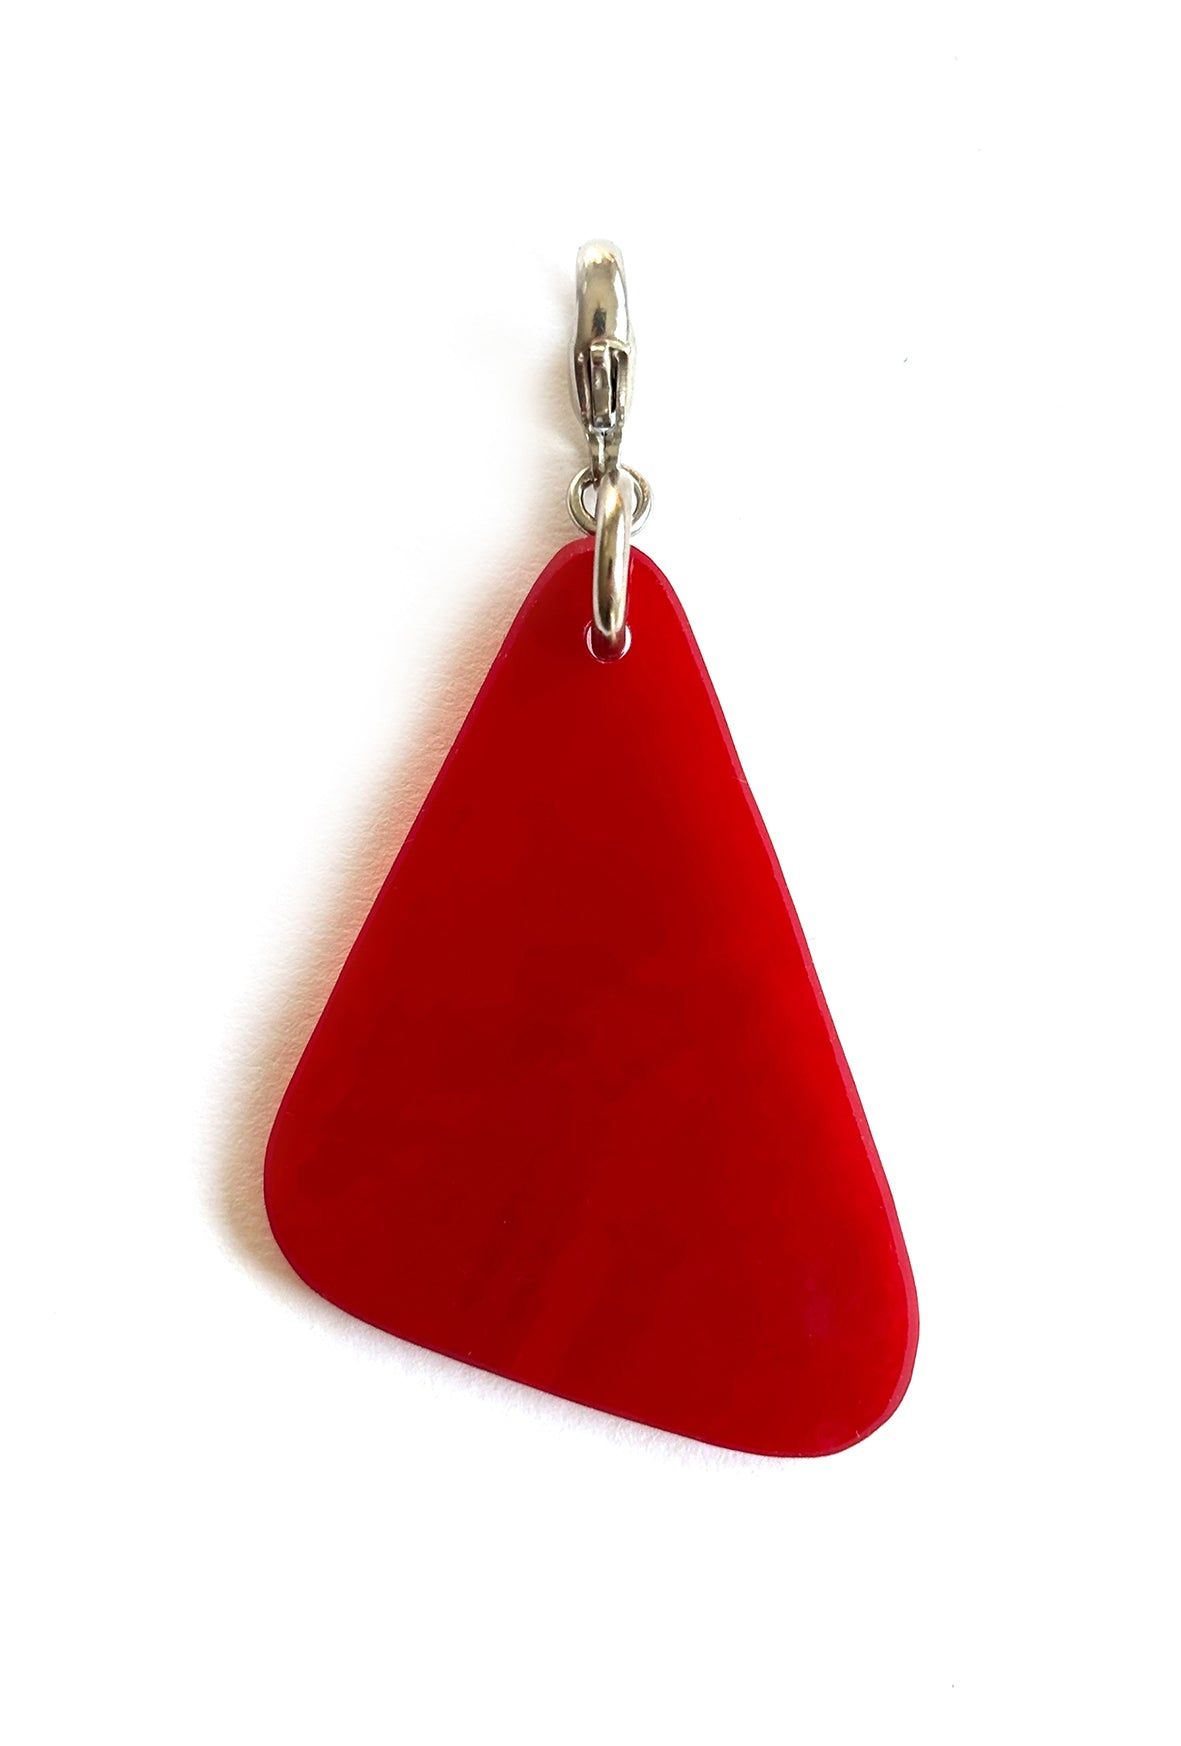 Pendant fire red